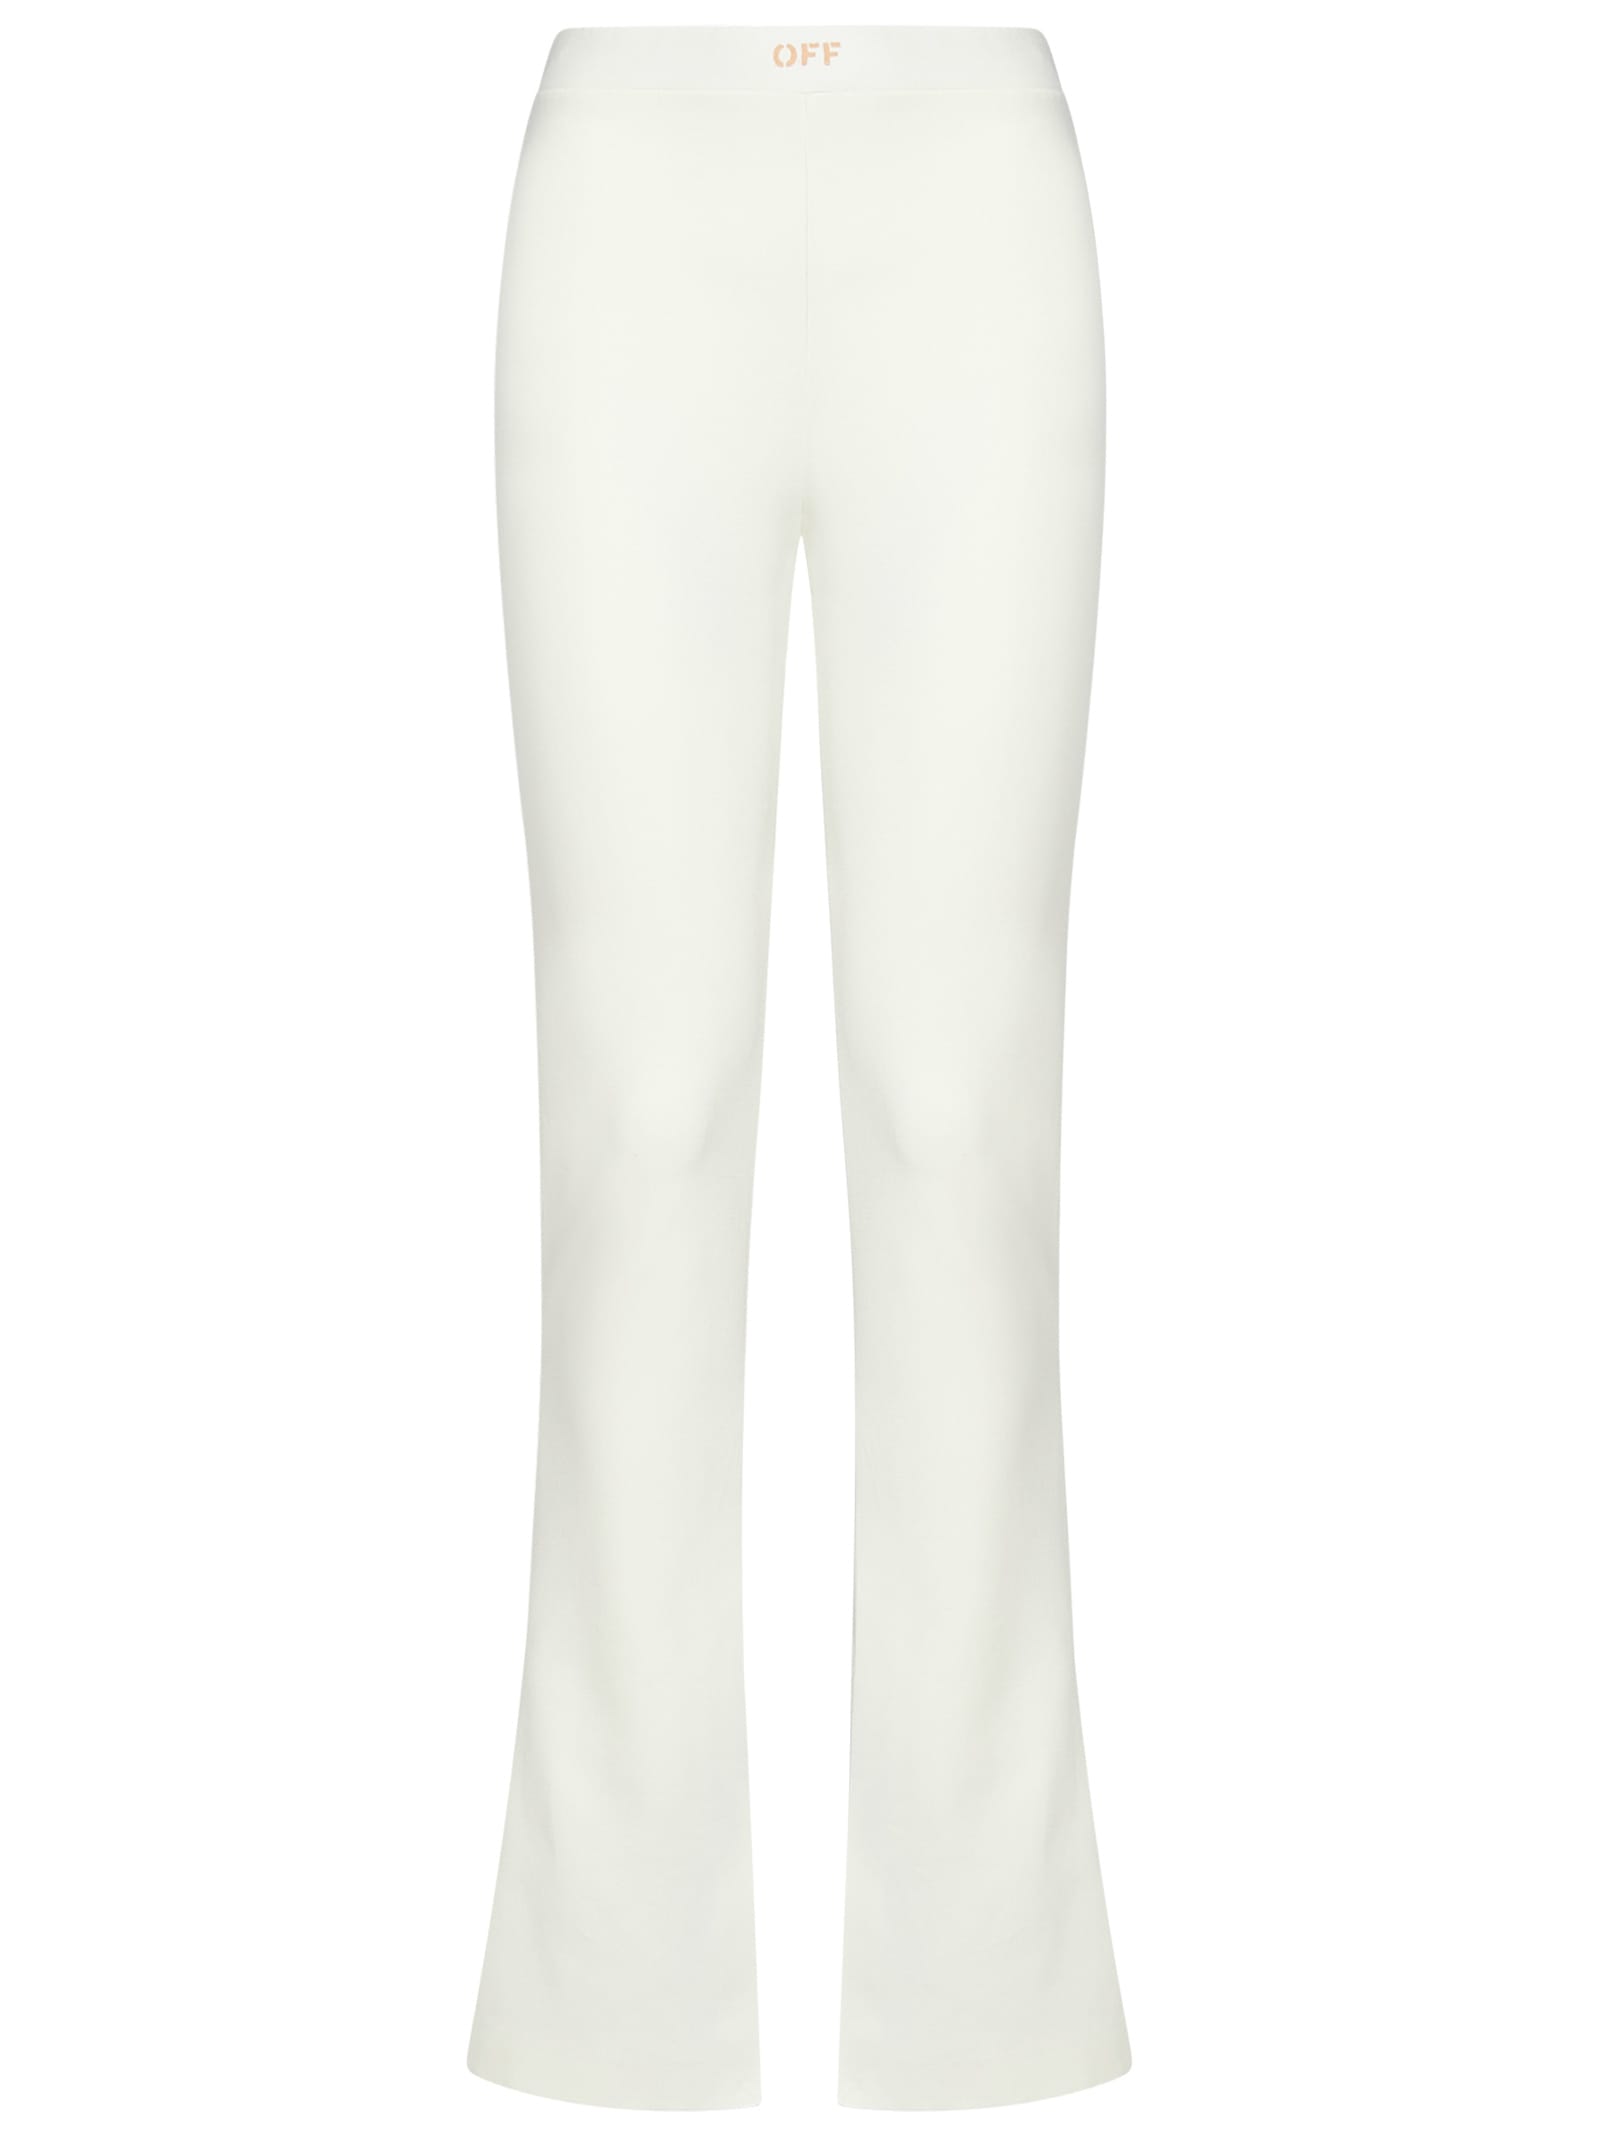 OFF-WHITE TROUSERS